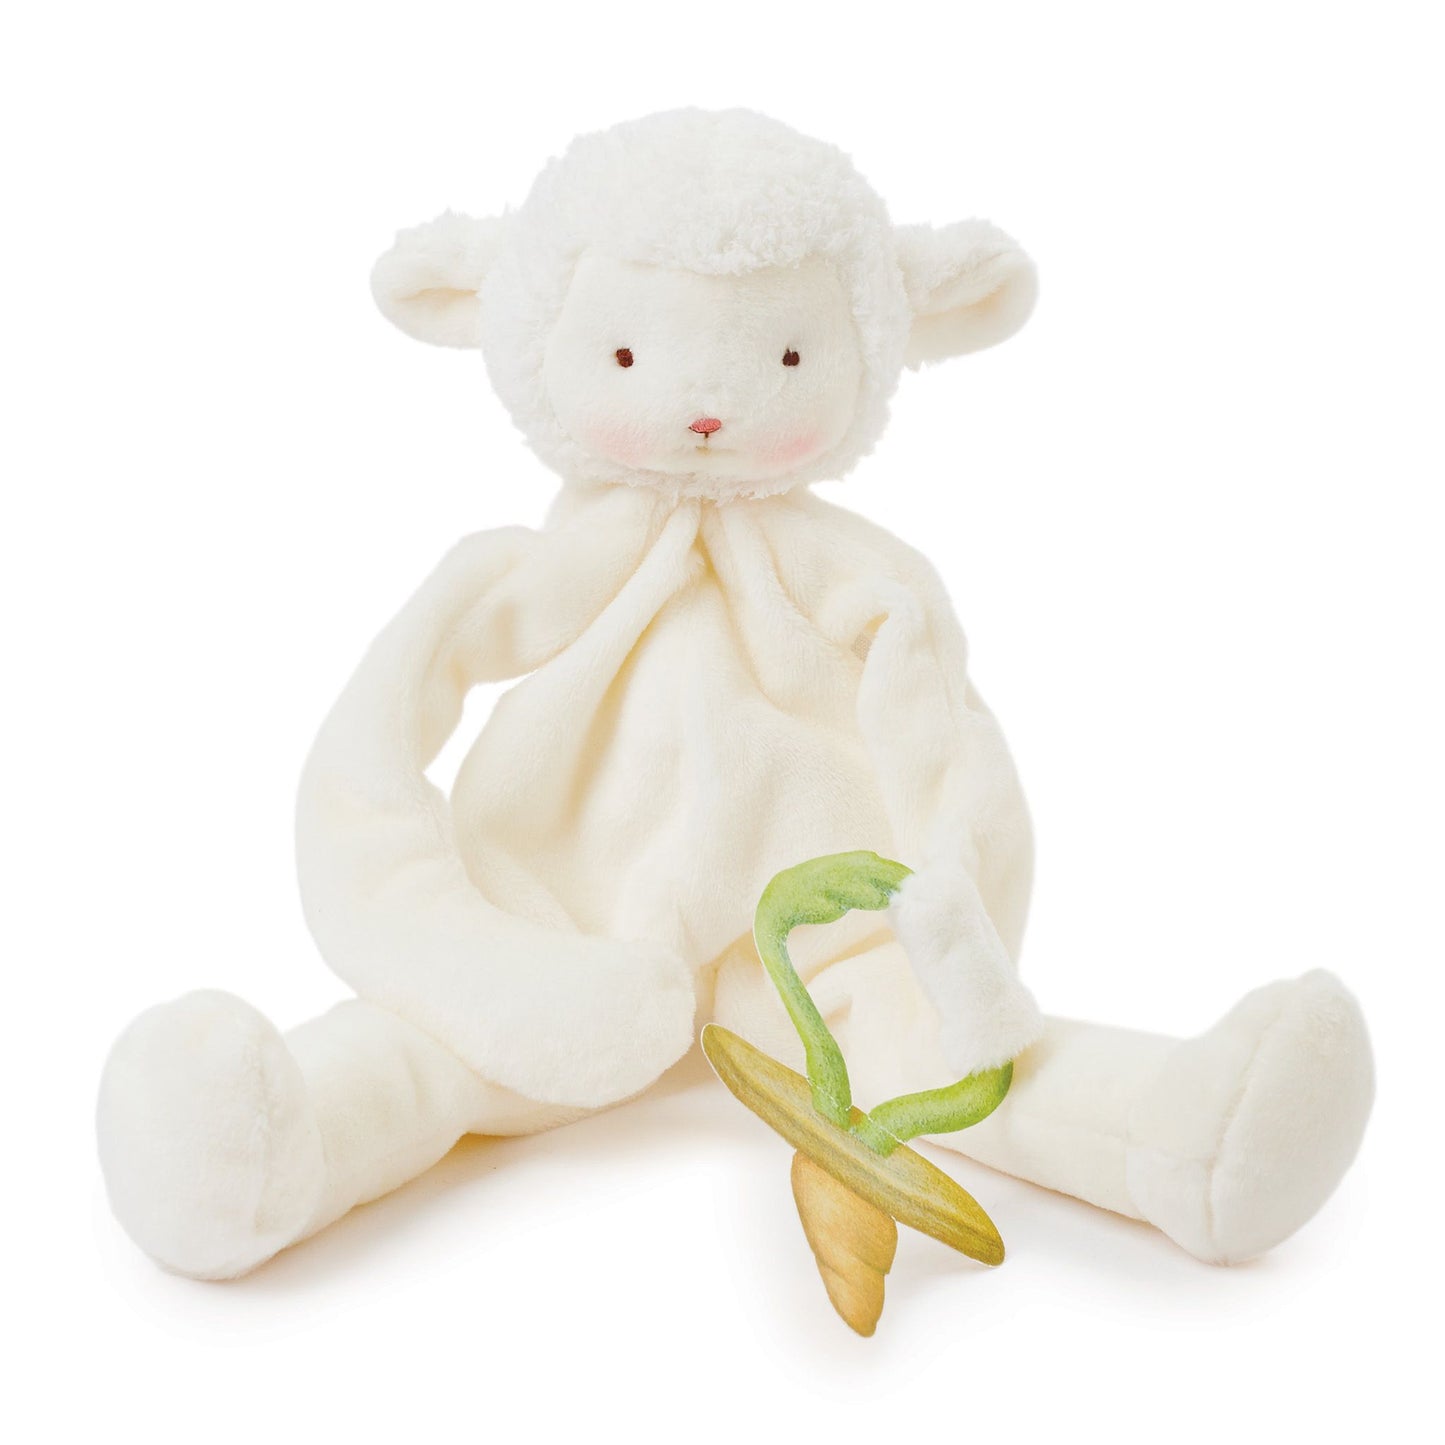 Bunnies by the bay soft and cuddly baby plush toy & pacifier holder - white plush Lamb silly buddy